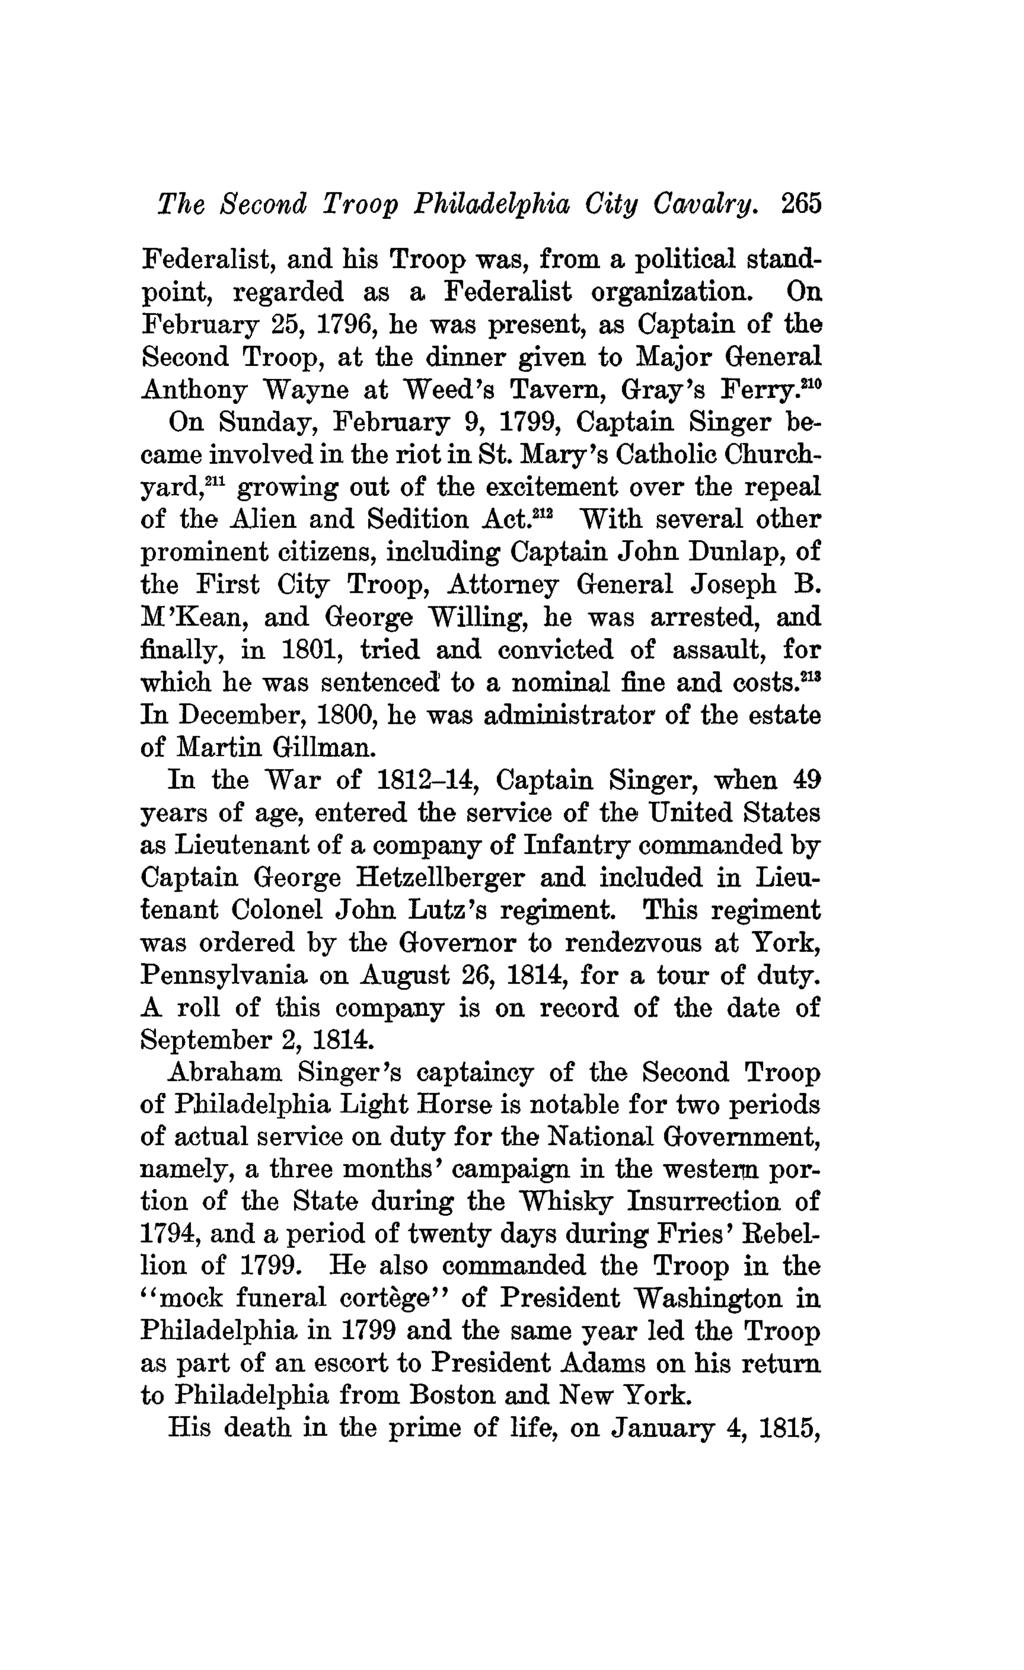 The Second Troop Philadelphia City Cavalry. 265 Federalist, and his Troop was, from a political standpoint, regarded as a Federalist organization.